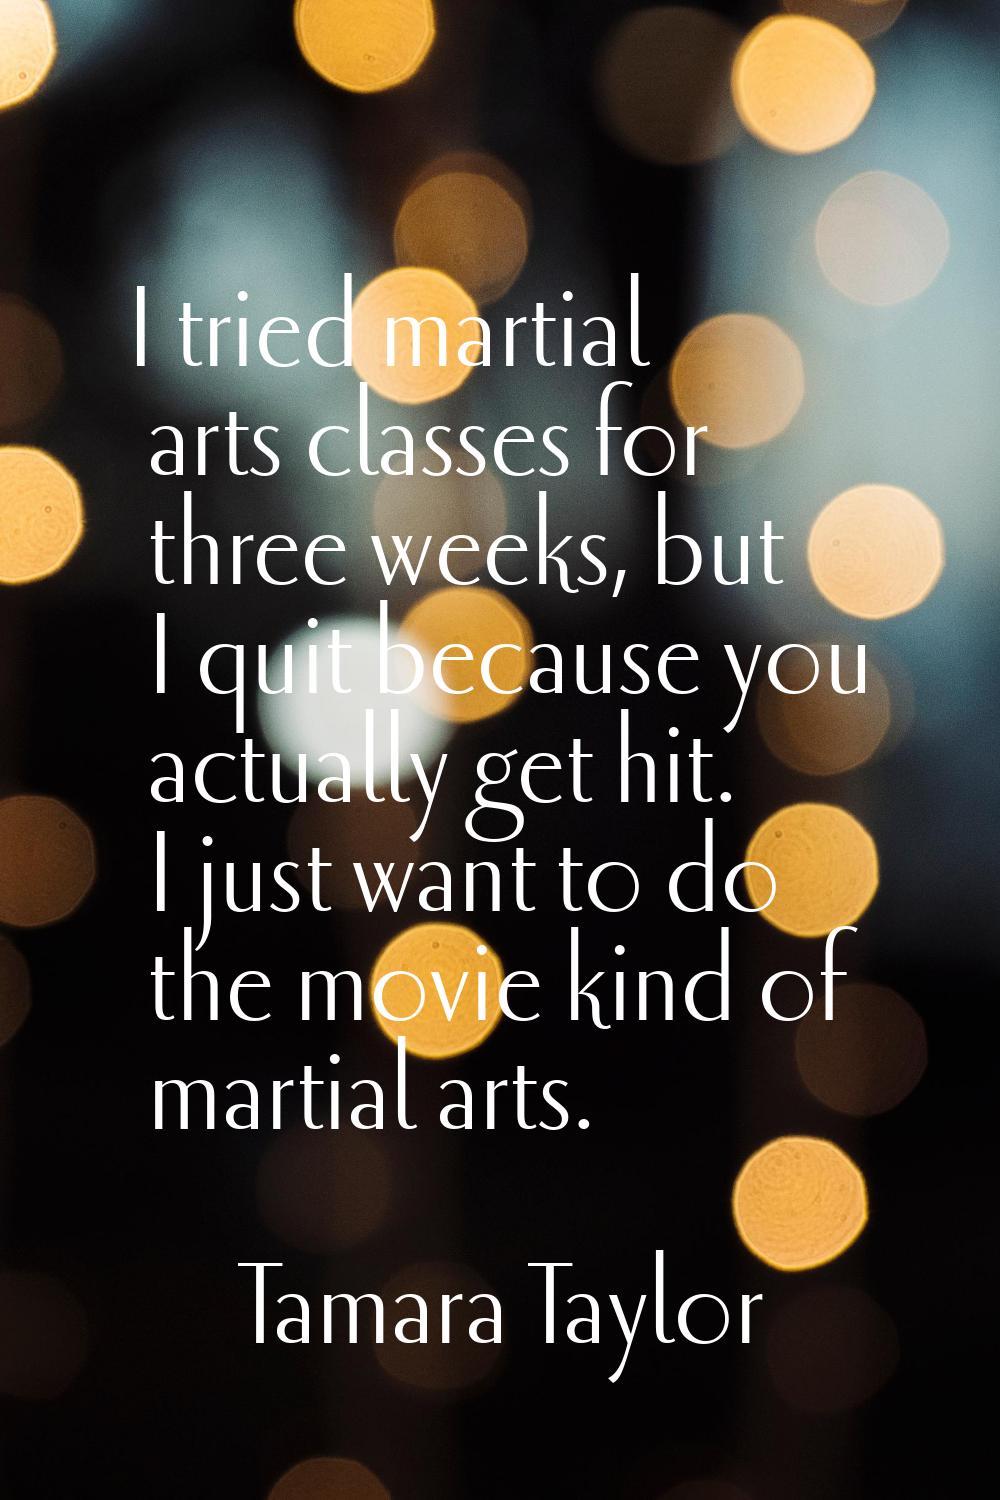 I tried martial arts classes for three weeks, but I quit because you actually get hit. I just want 